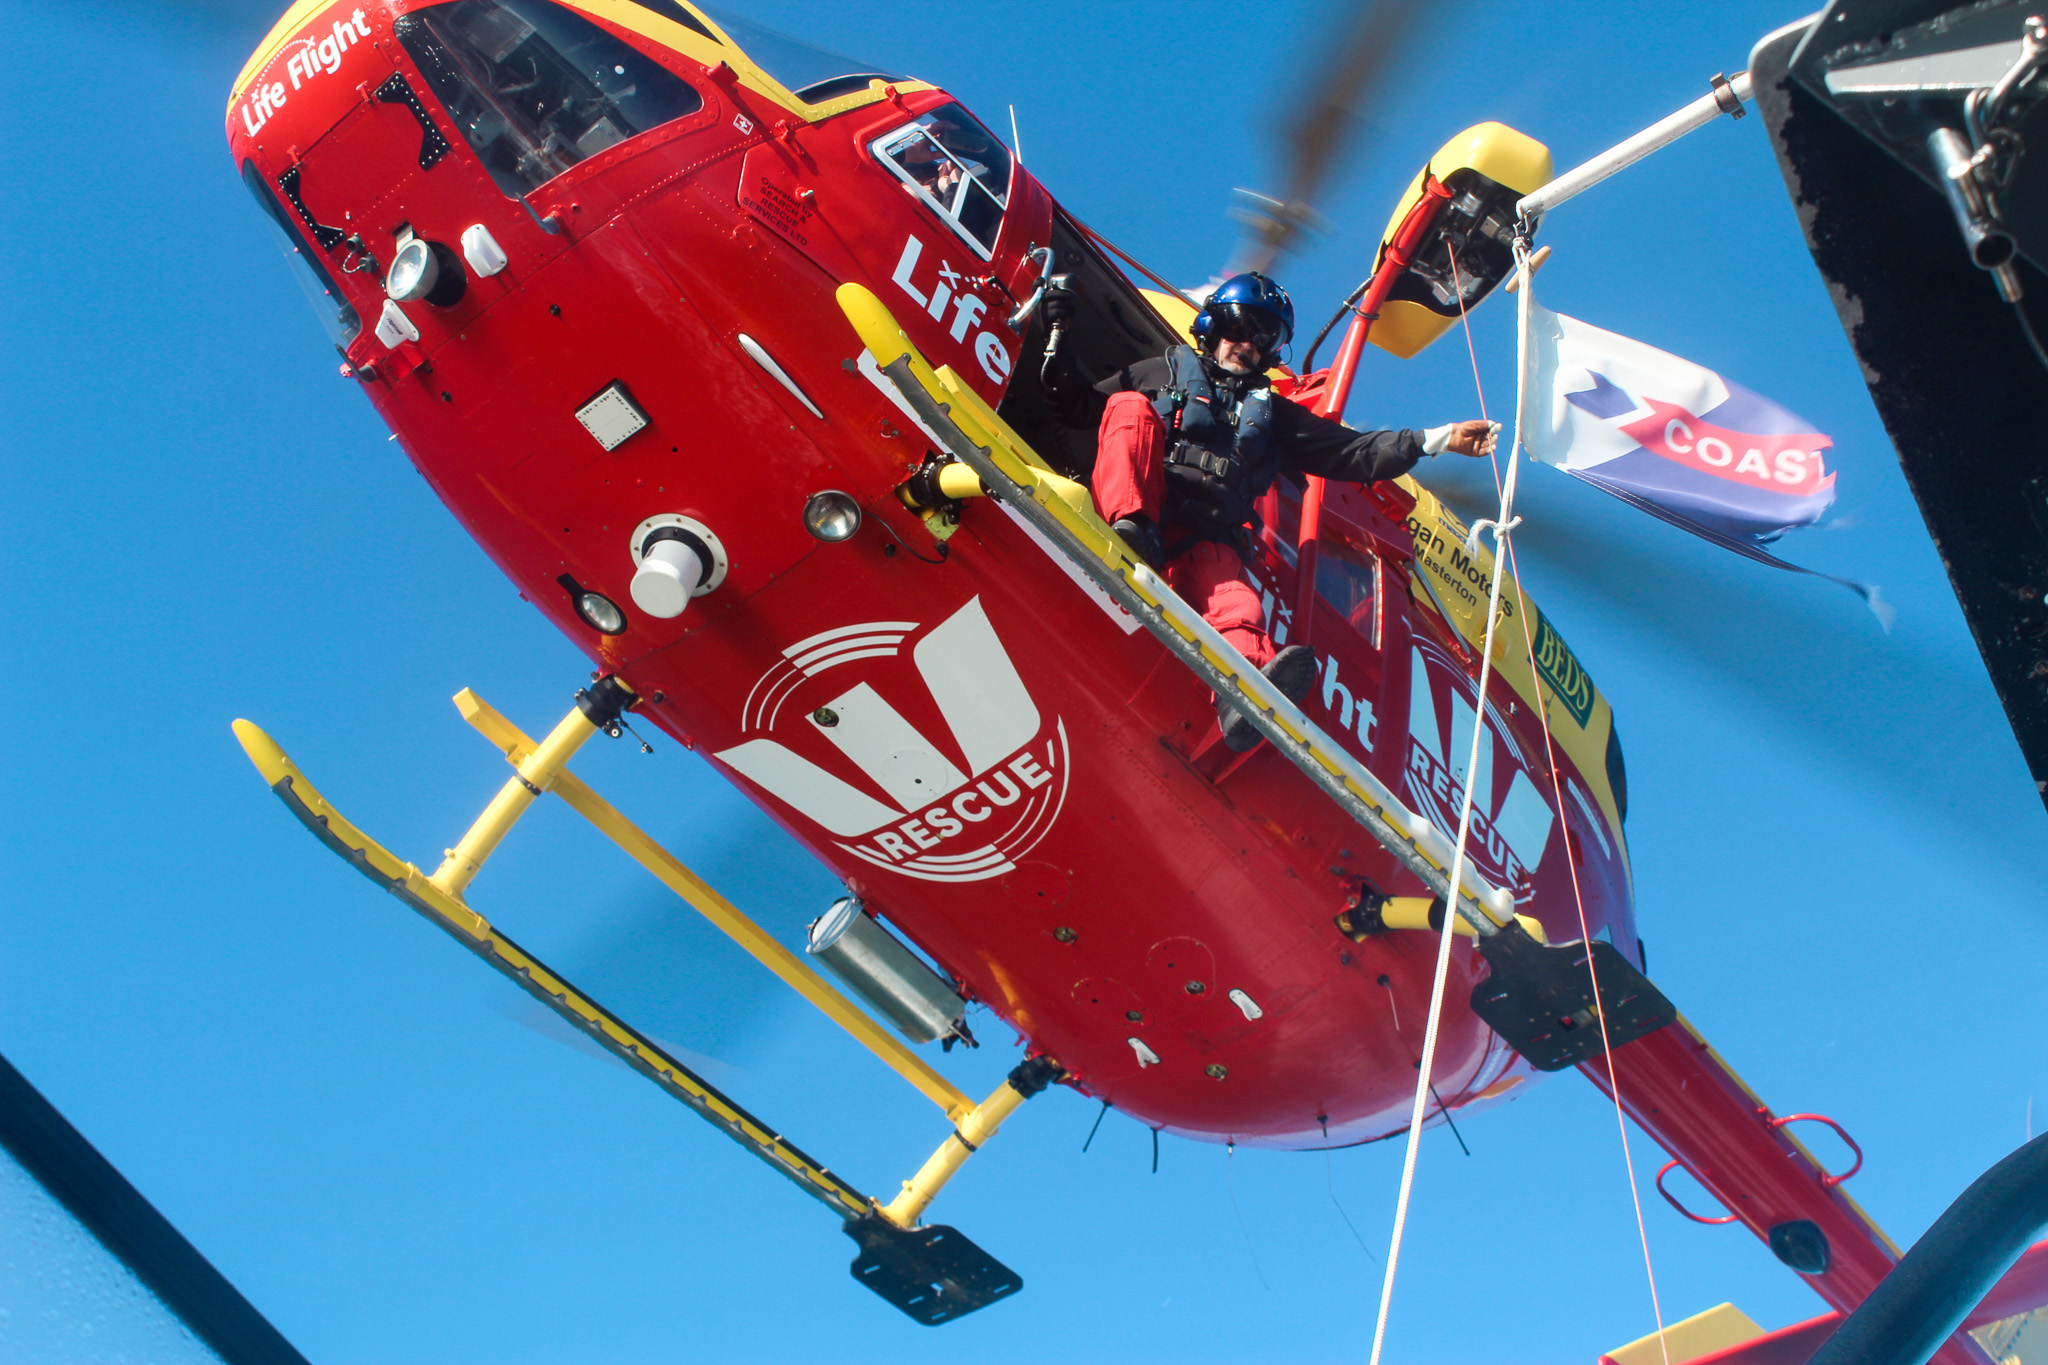 Westpac Rescue Helicopter - Life Flight